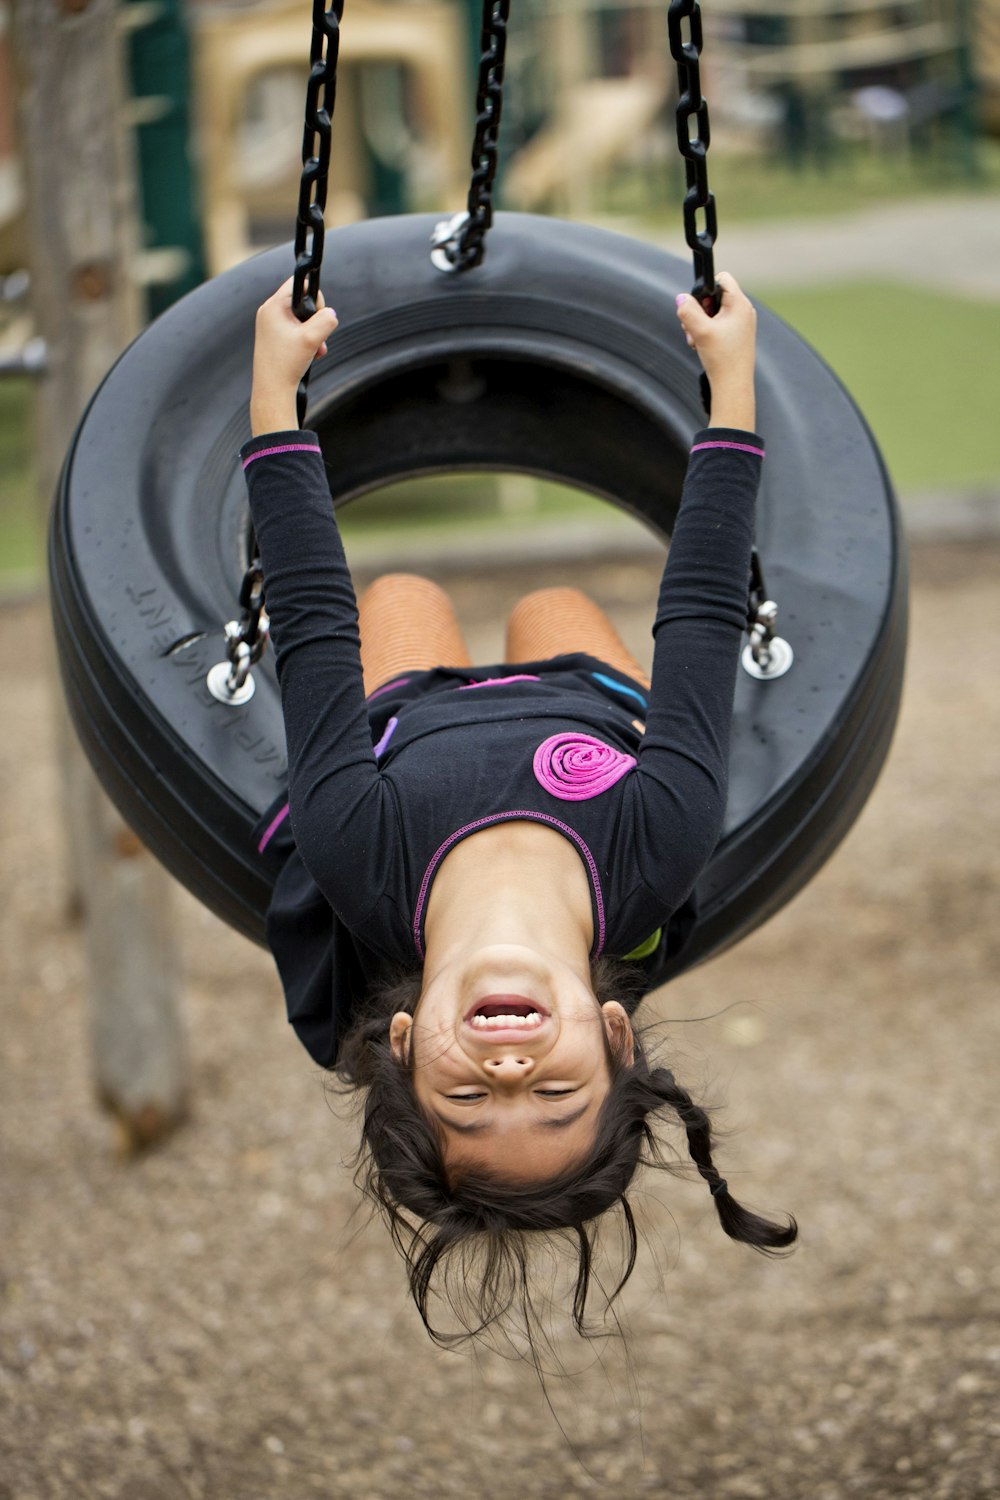 girl in black and pink long sleeve shirt riding on black and gray swing during daytime